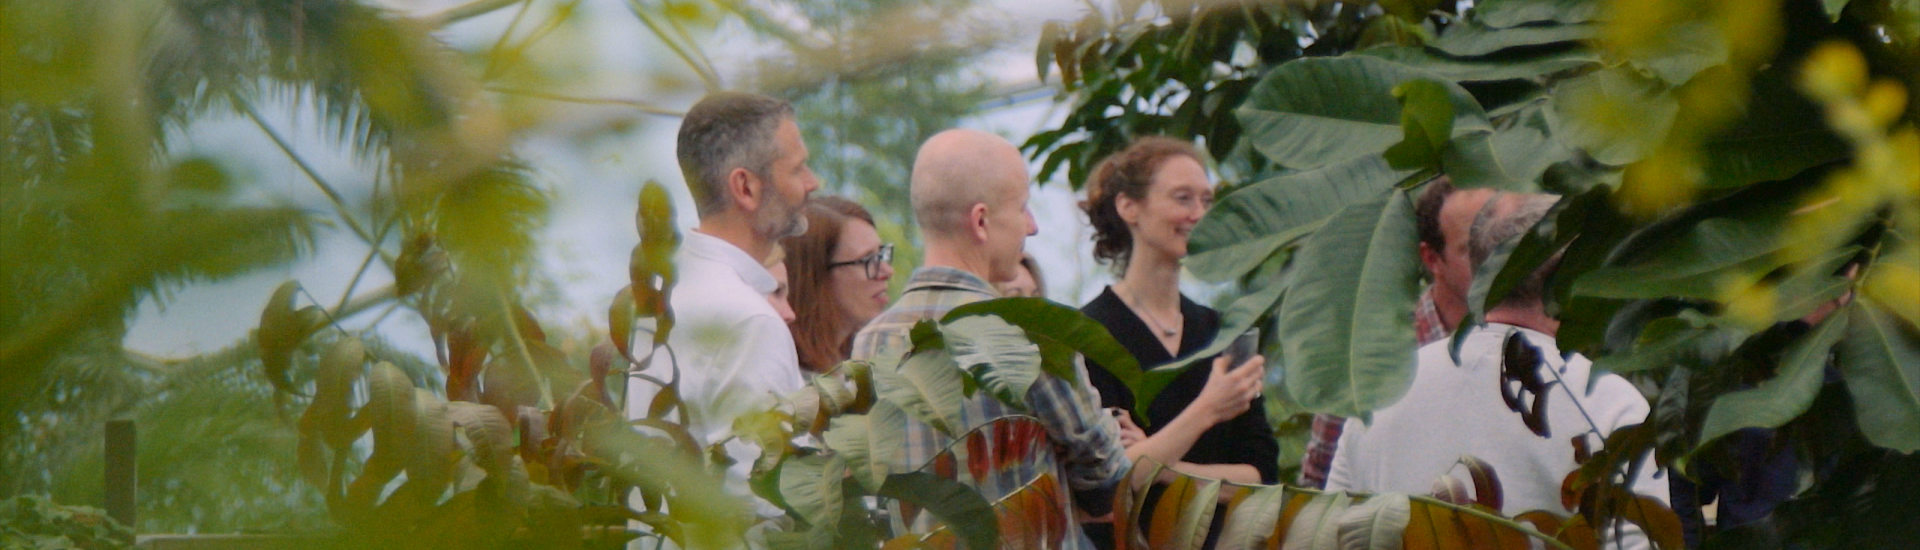 Leadership course participants in the Rainforest Biome surrounded by leaves